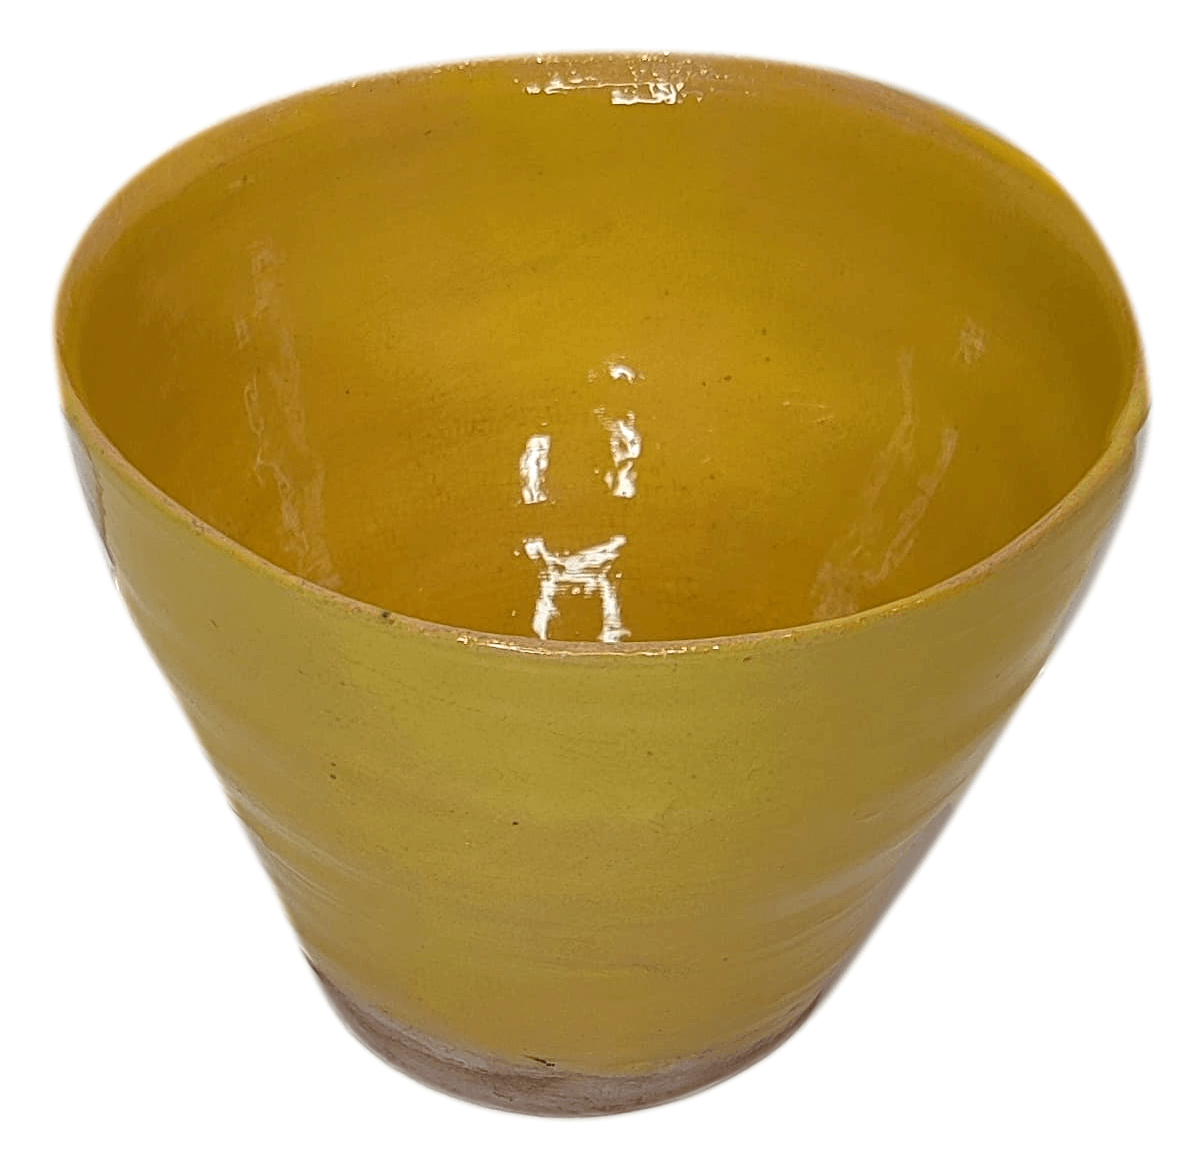 Pottery Bowl Wheel Thrown Clay Creatively Glazed Food Safe Handcrafted By New Mexico Artist H: 3.5 inches X W: 4.5 inches D: 3.5 inches - Ysleta Mission Gift Shop- VOTED El Paso's Best Gift Shop